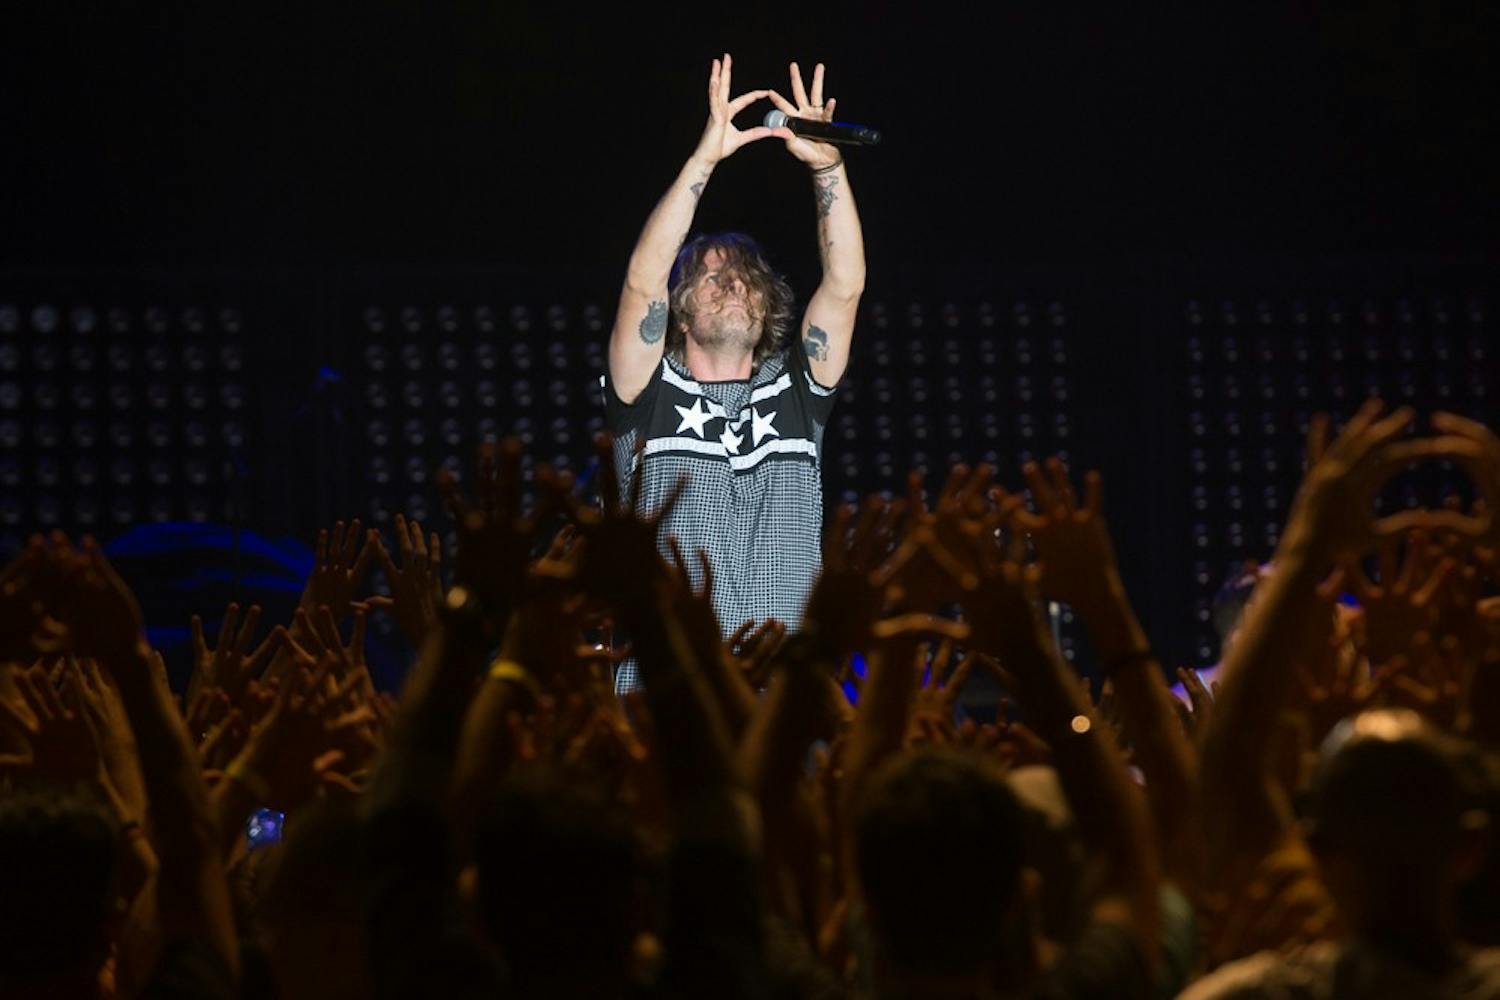 Sean Foreman of 3OH!3 performs during ASU's Fall Welcome Concert on Tuesday, Aug. 18, 2015, at Wells Fargo Arena in Tempe.